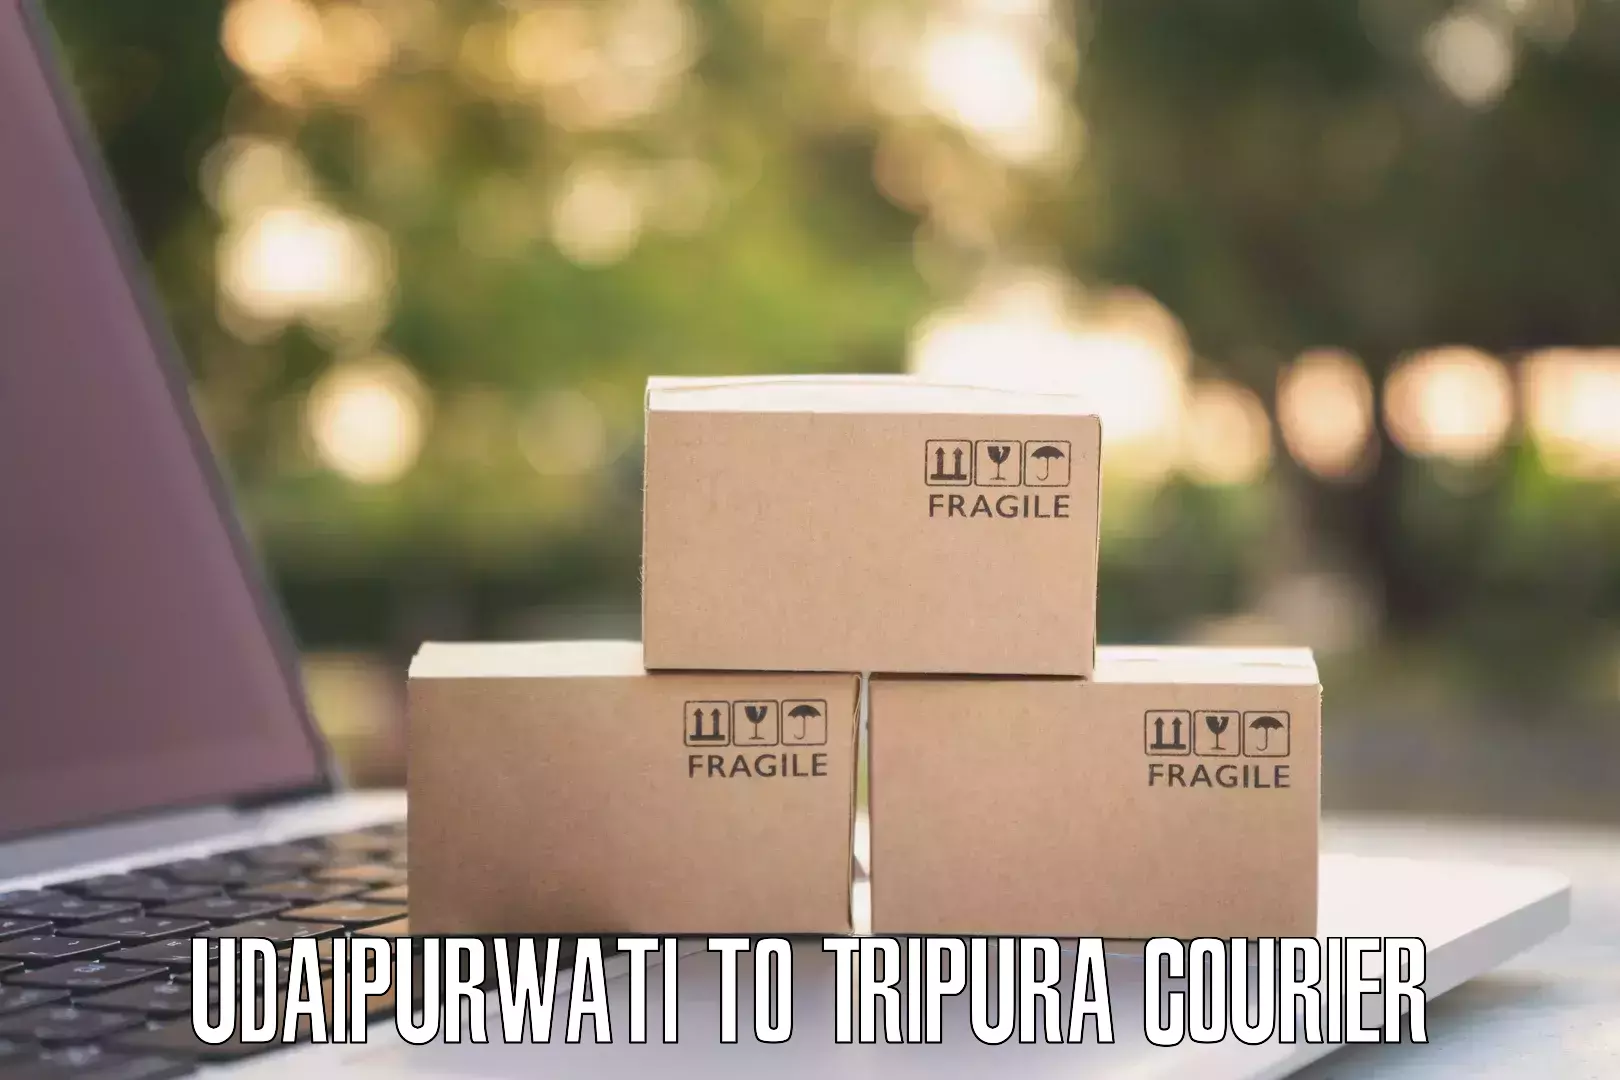 Customized delivery options Udaipurwati to South Tripura